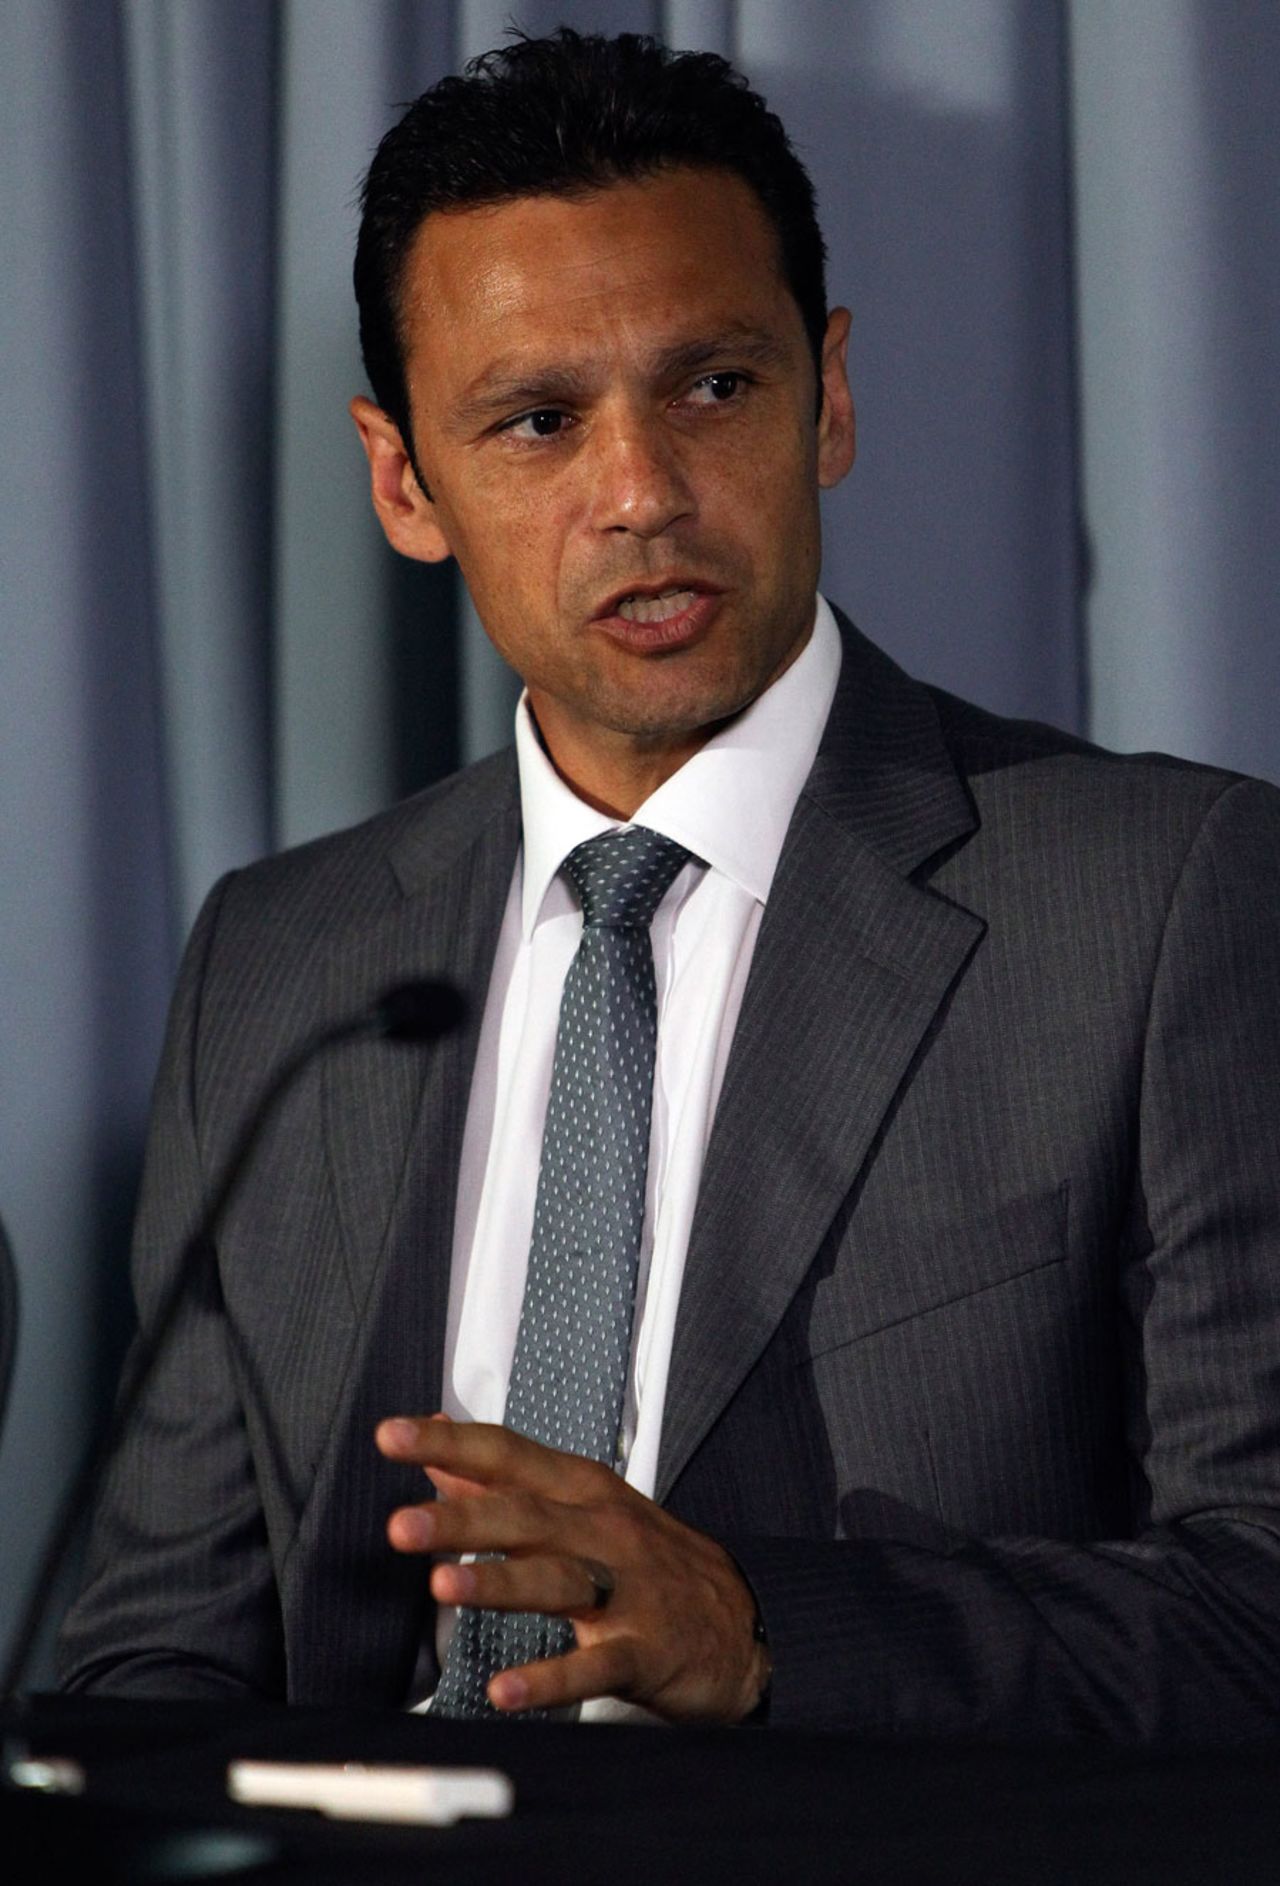 Mark Ramprakash announces his retirement from cricket, The Oval, July 5, 2012